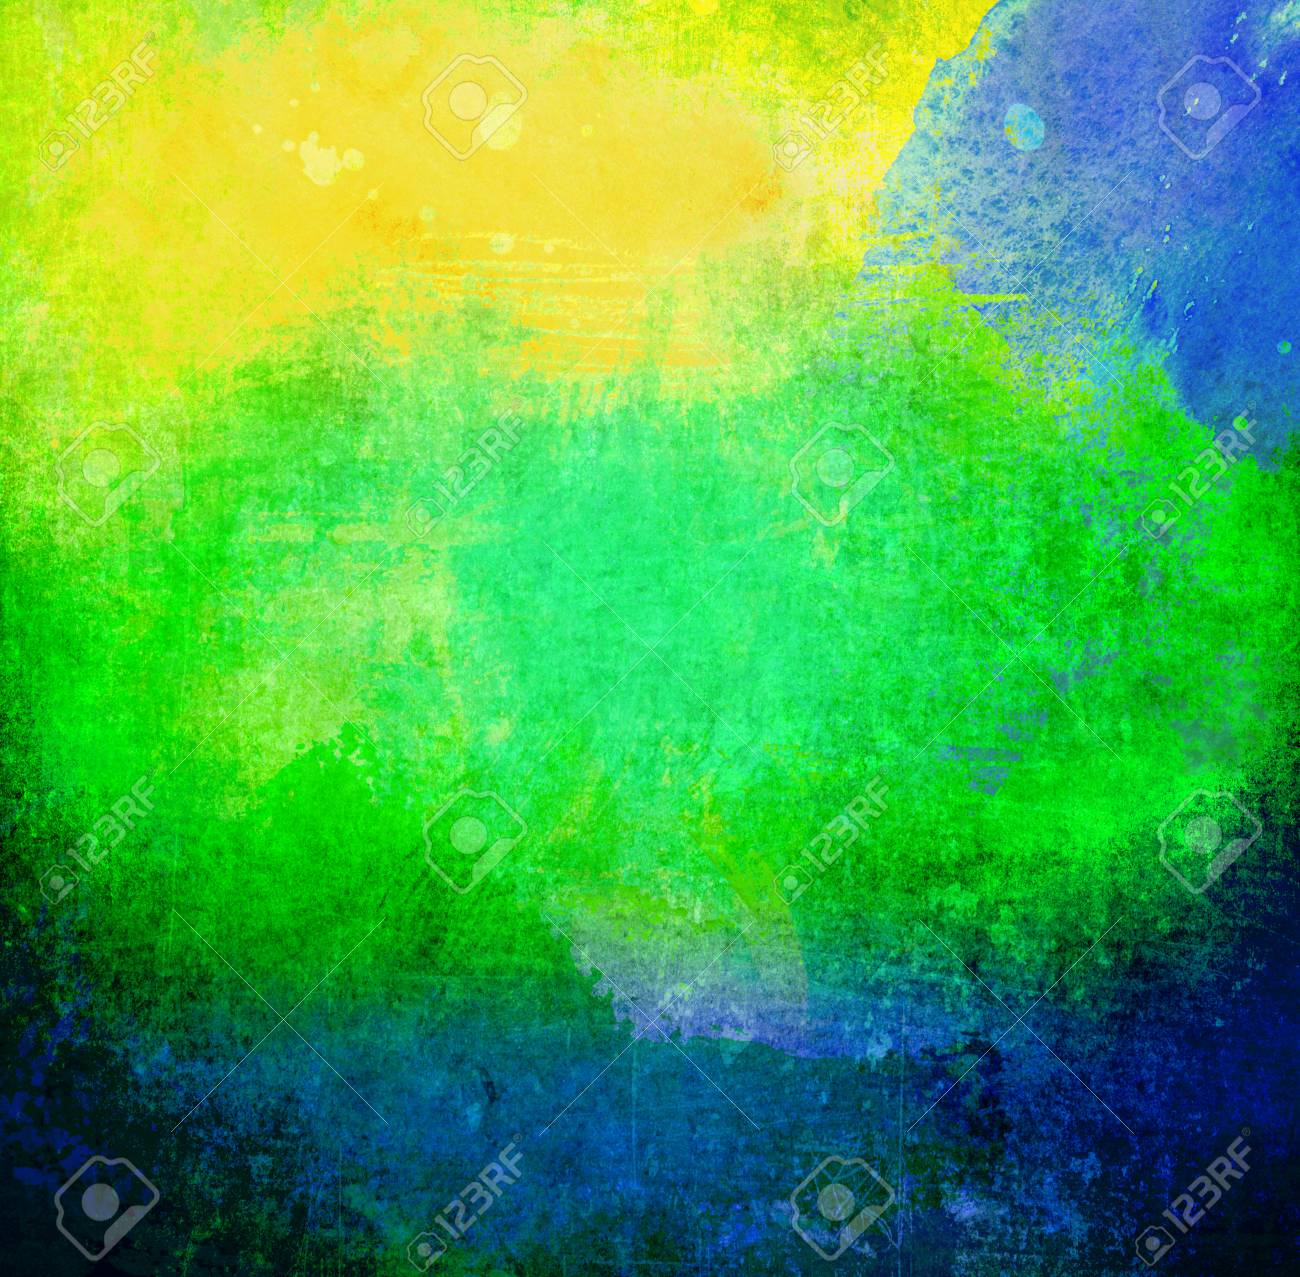 Brazil Tone Background Design Stock Photo Picture And Royalty